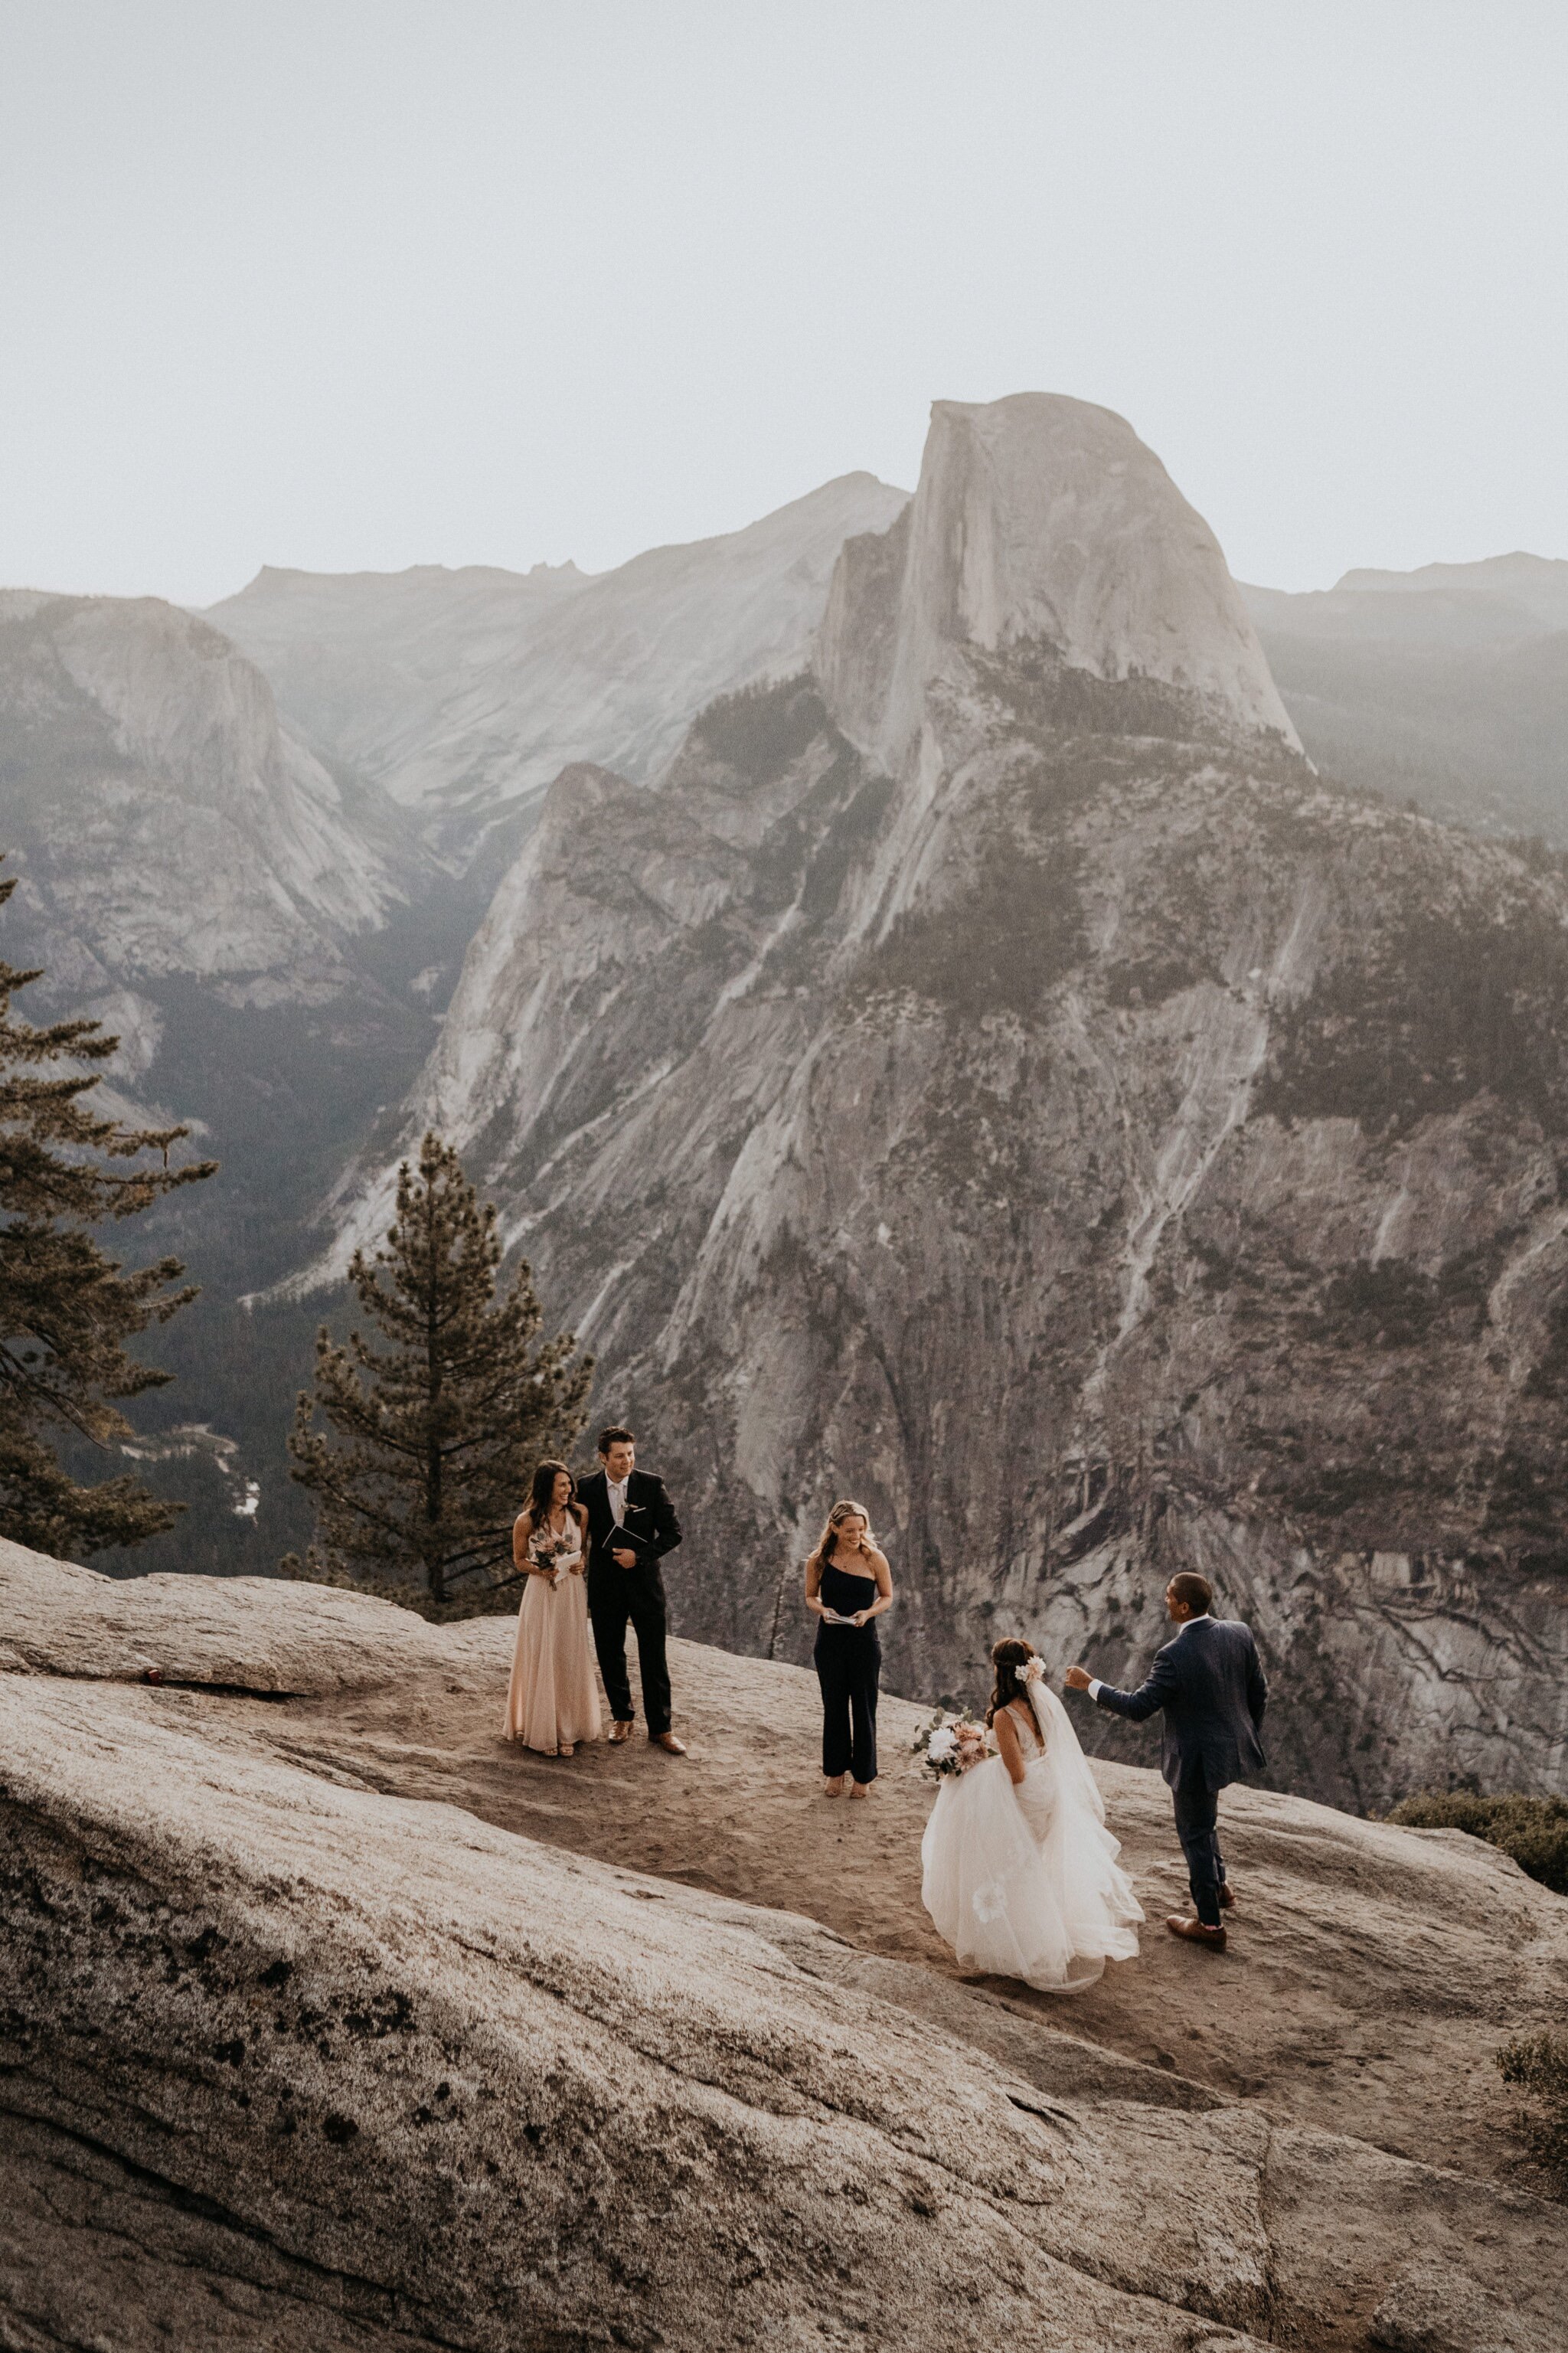 Yosemite National Park elopement photos at Glacier Point during sunrise with view of Half Dome